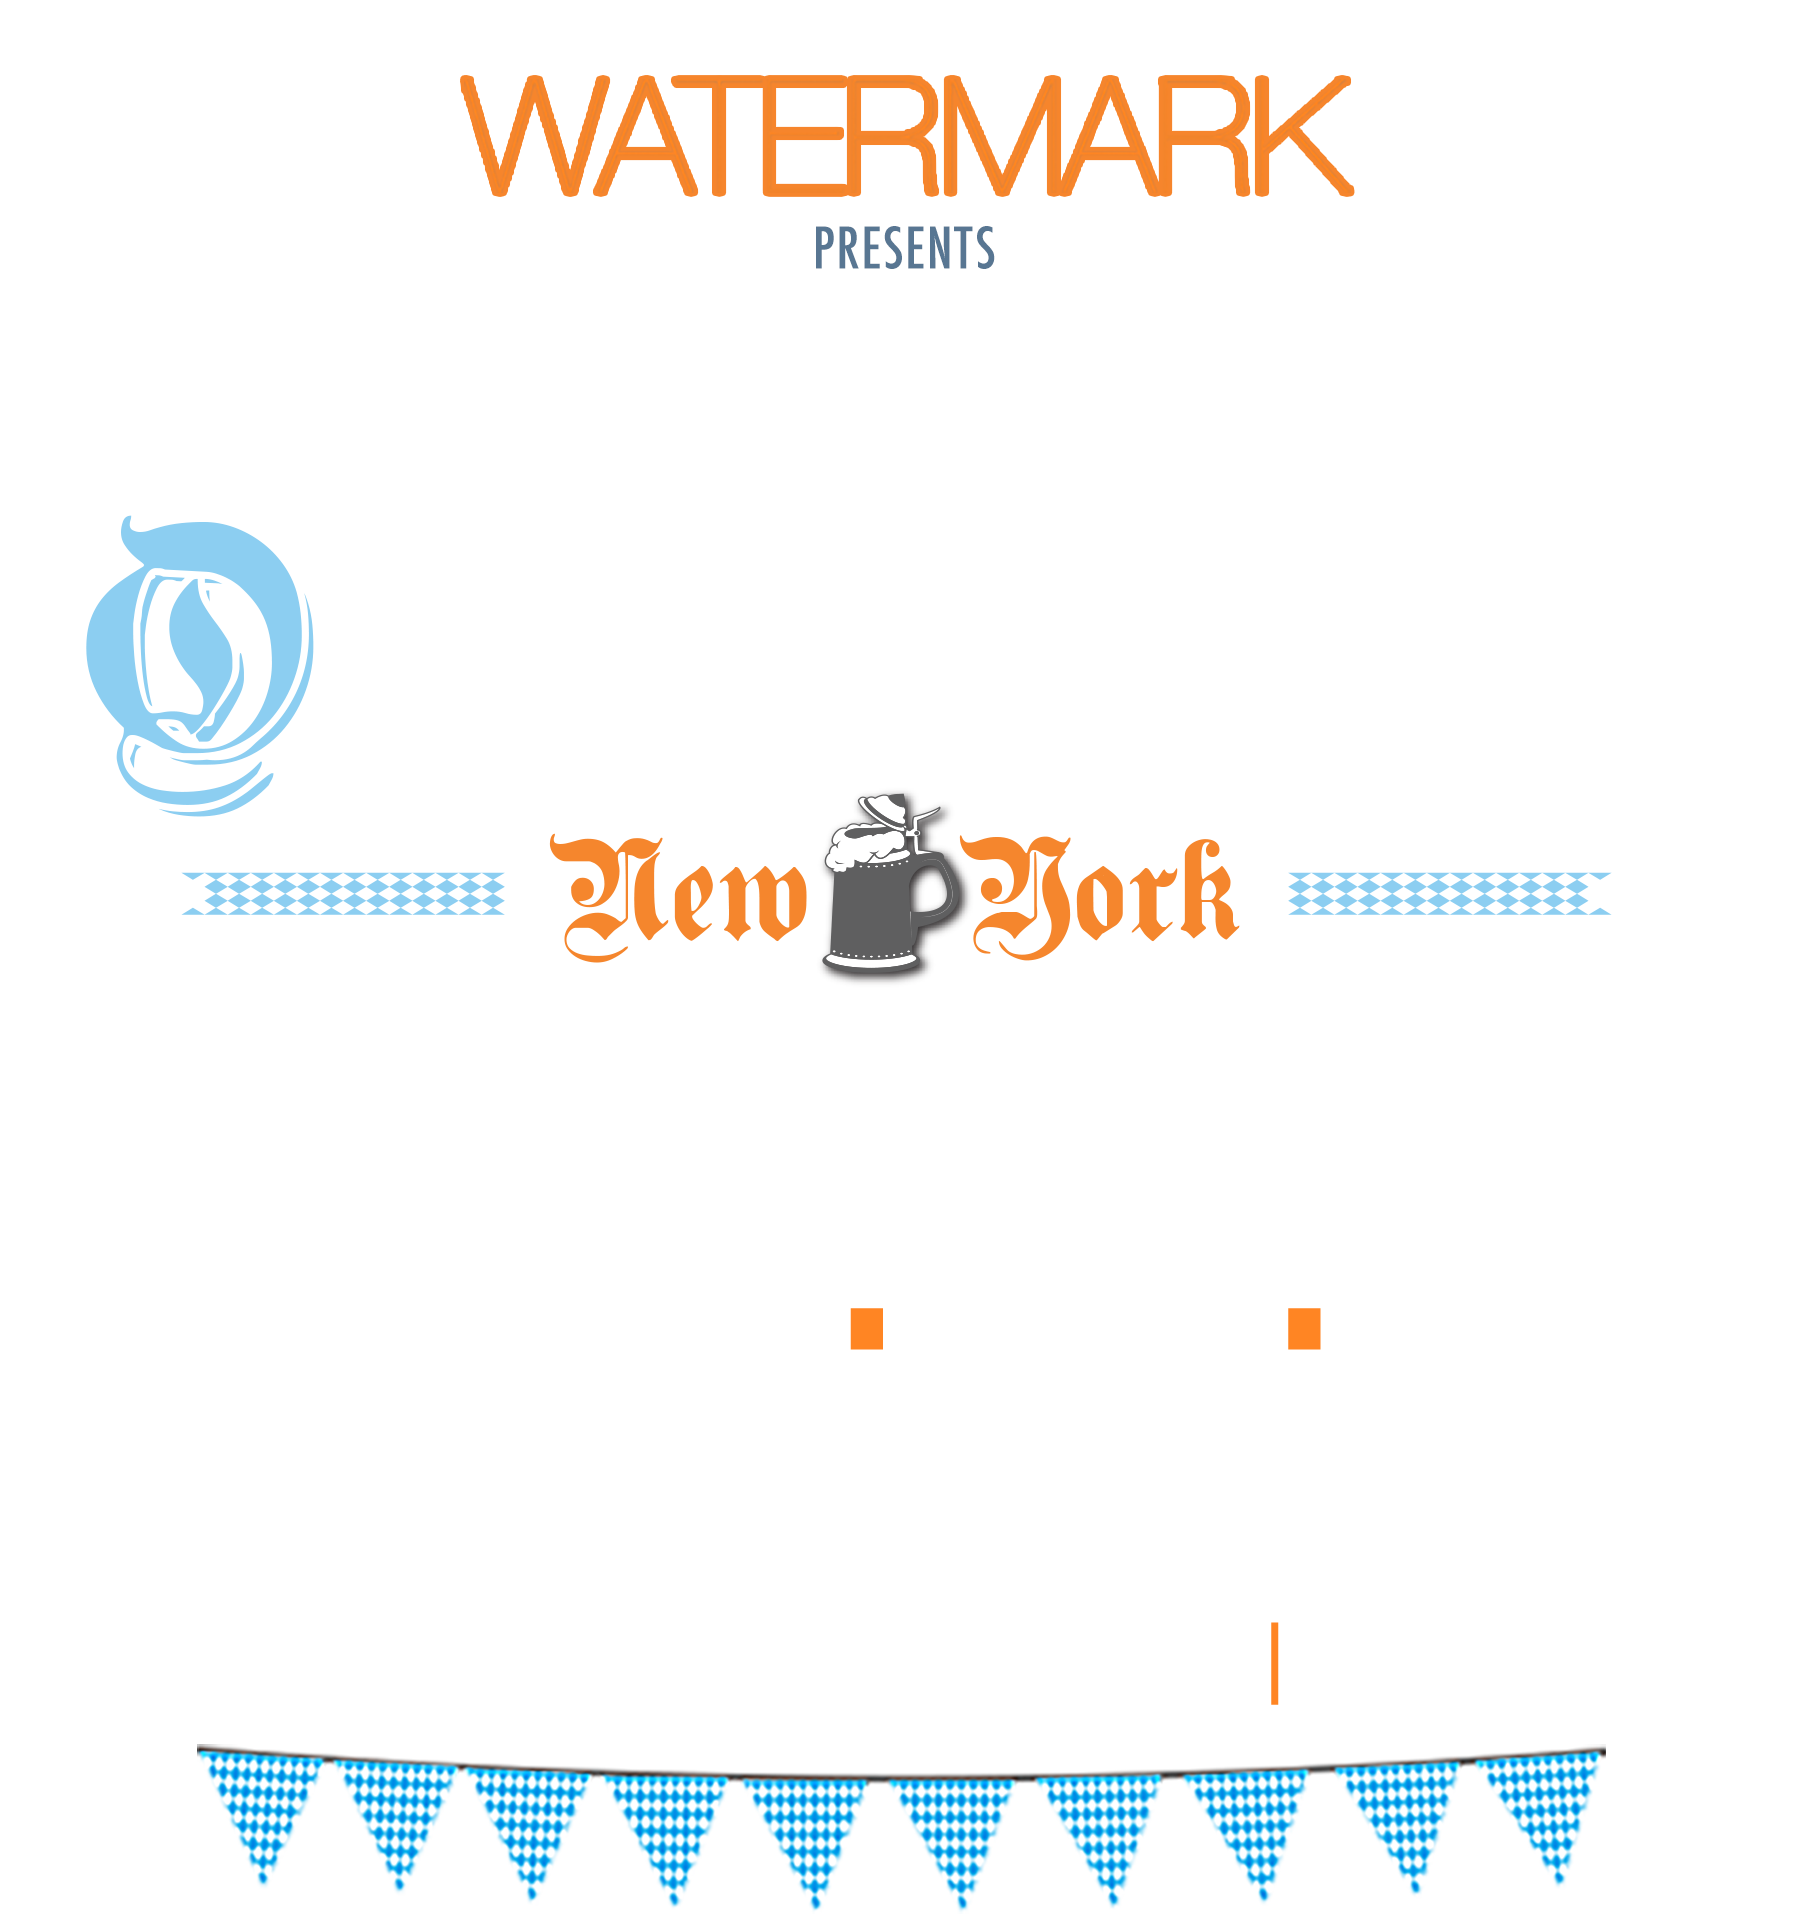 OktoberFest NYC 2024 at Watermark From September 16th to October 27th. Food, Fun, Beer & Entertainment.